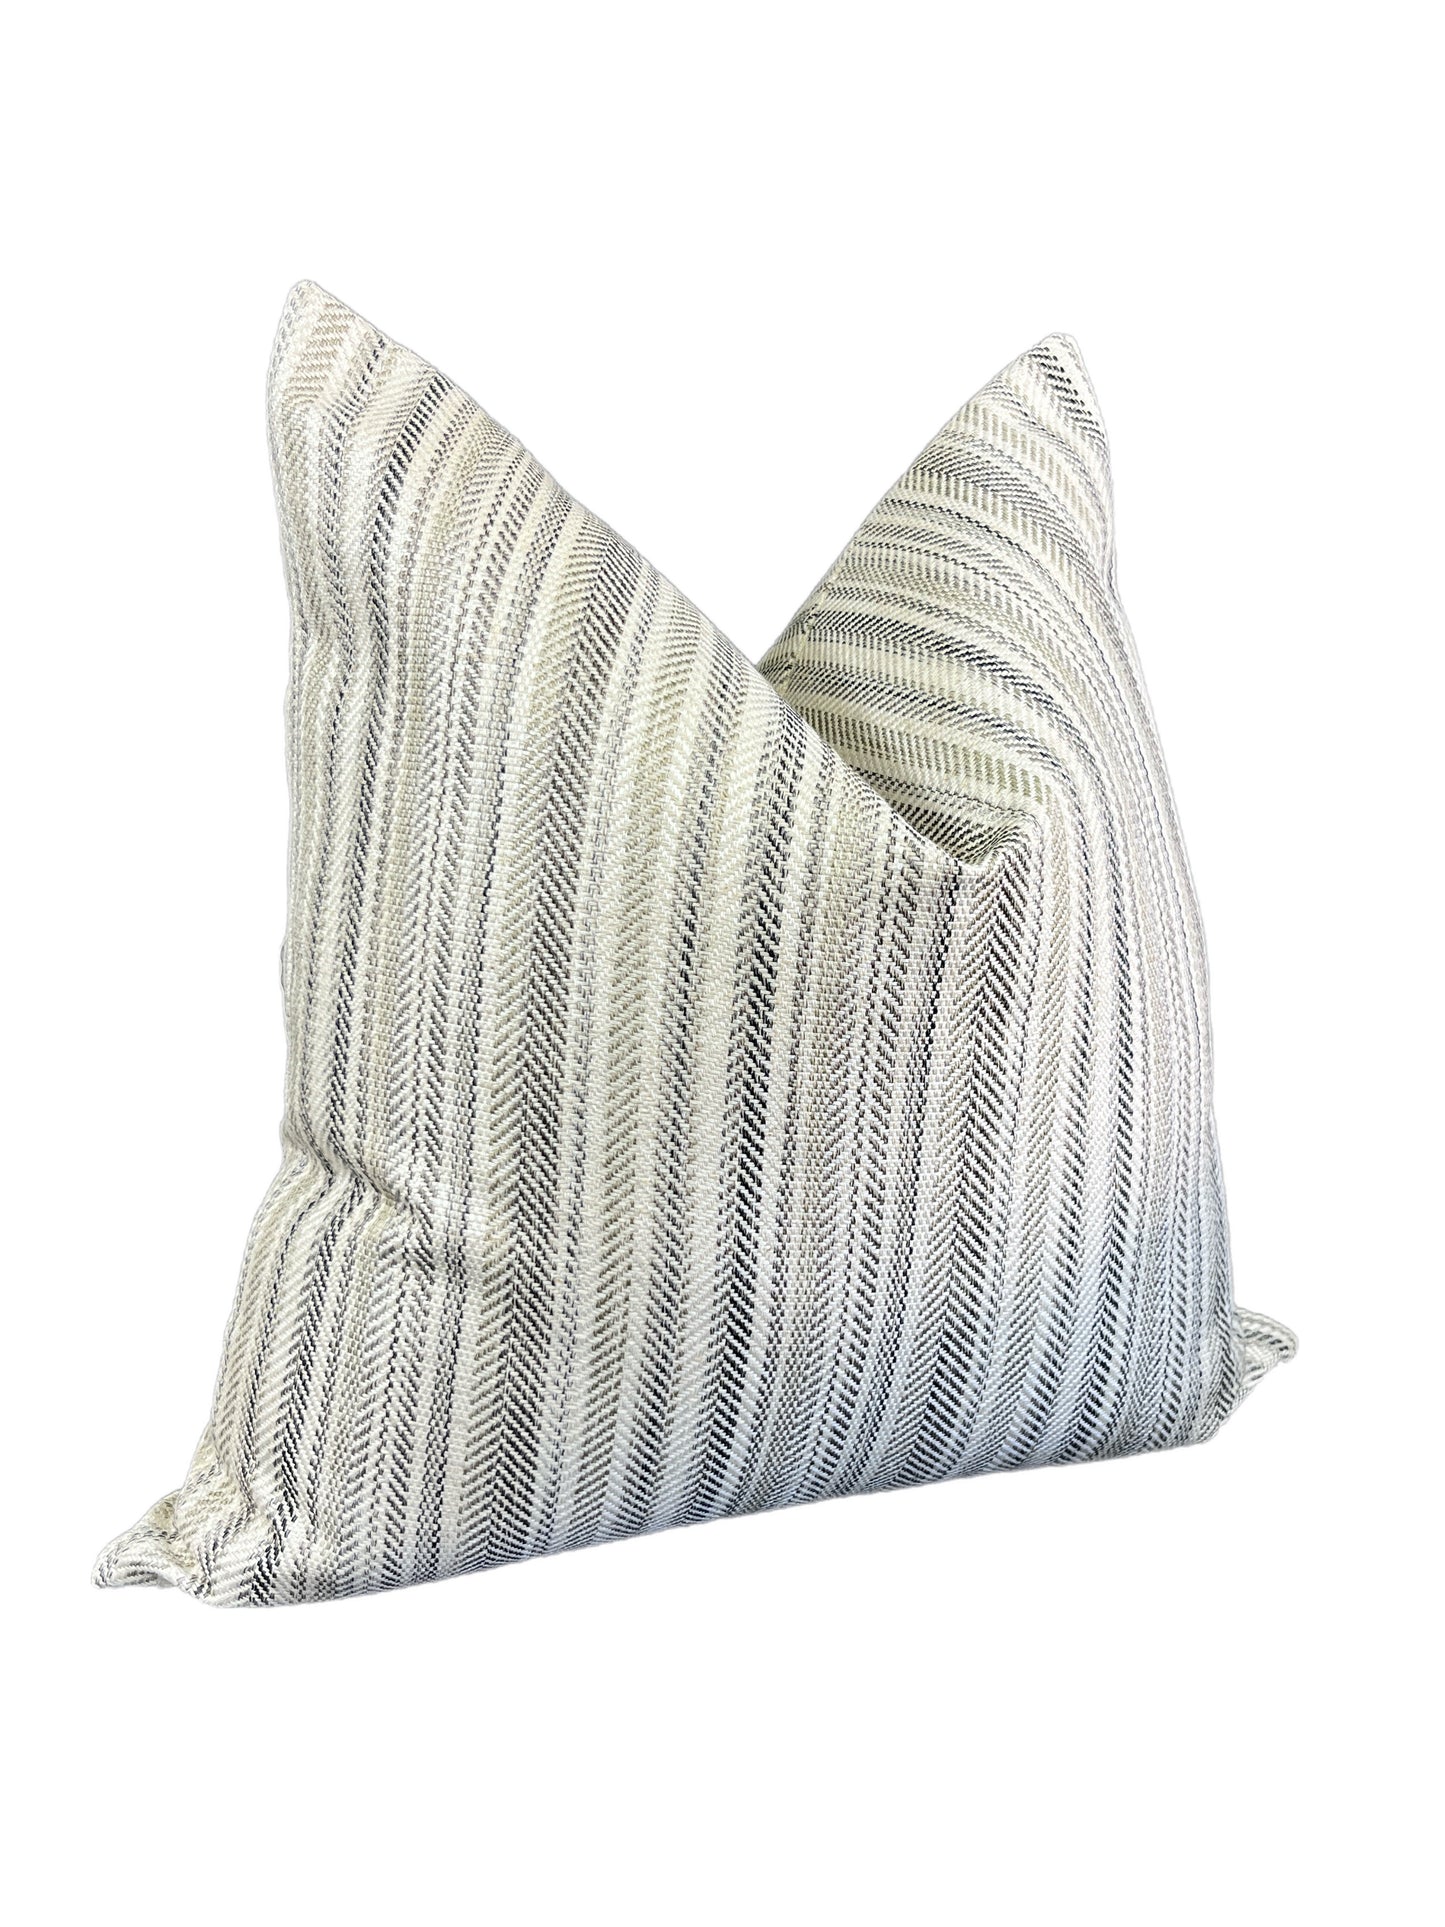 Luxury Pillow - 24" x 24" - Pearl Woven-Pewter; Pearlescent woven fabric in a stunning pewter gray